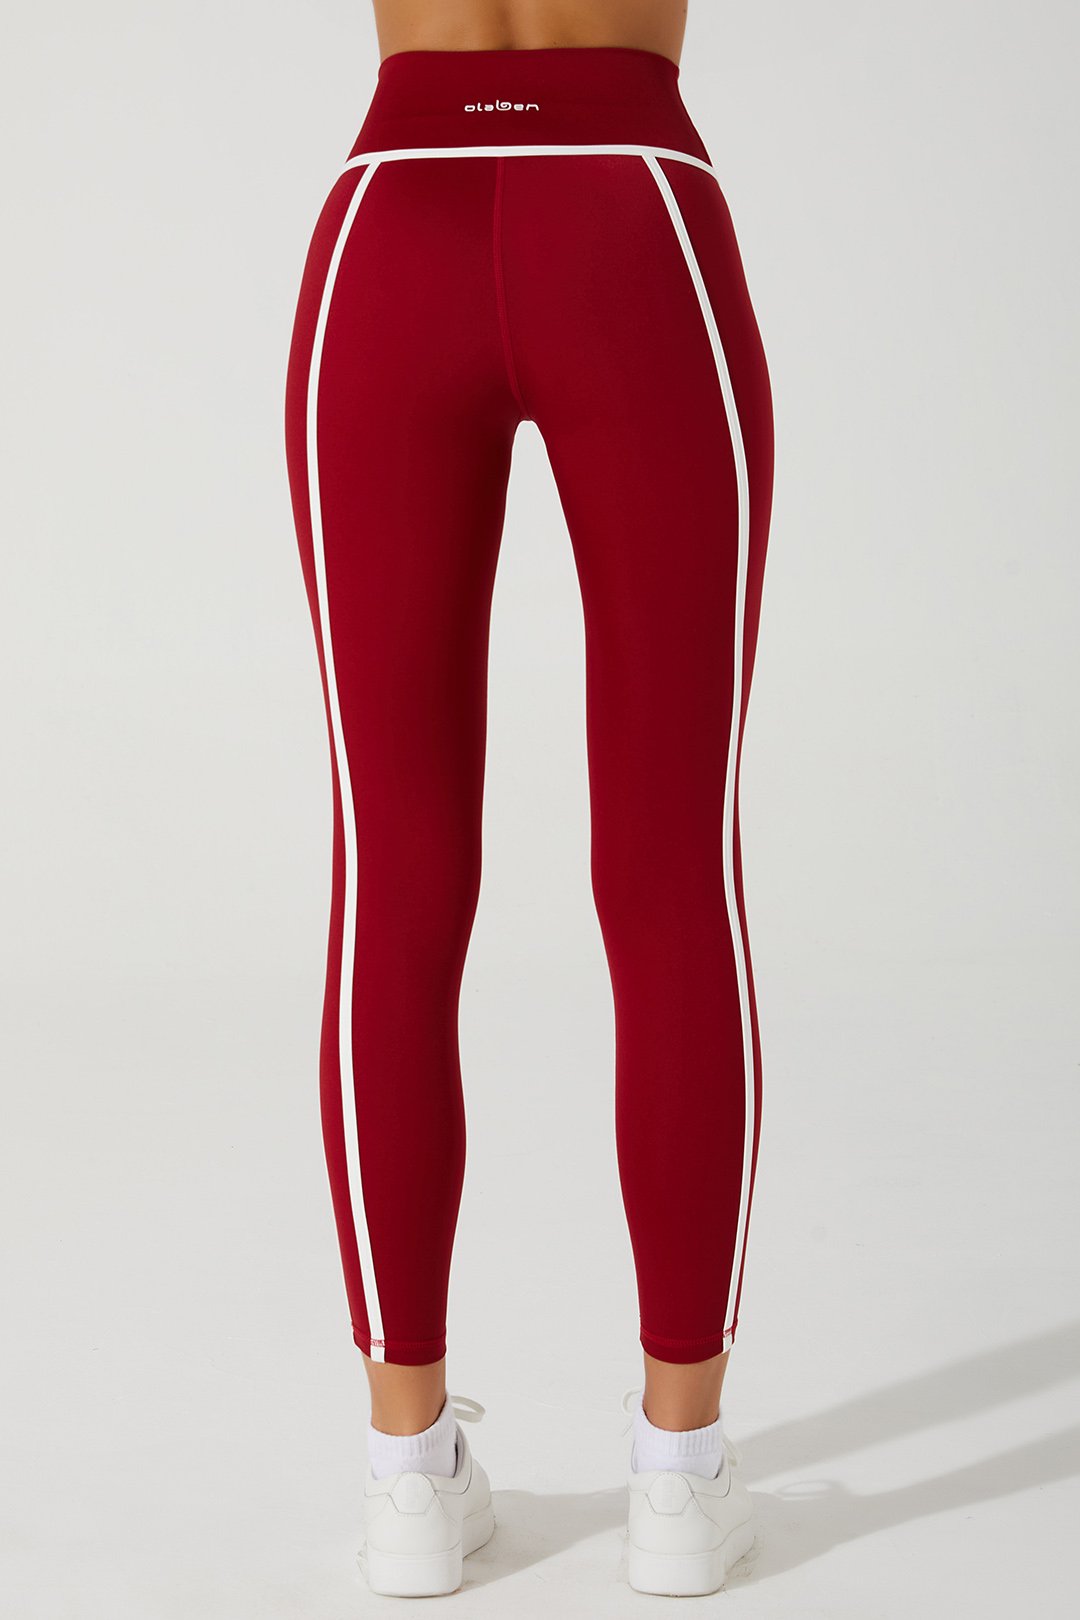 Vibrant magenta and red women's leggings with a lively and playful design - OW-0050-WLG-RD.